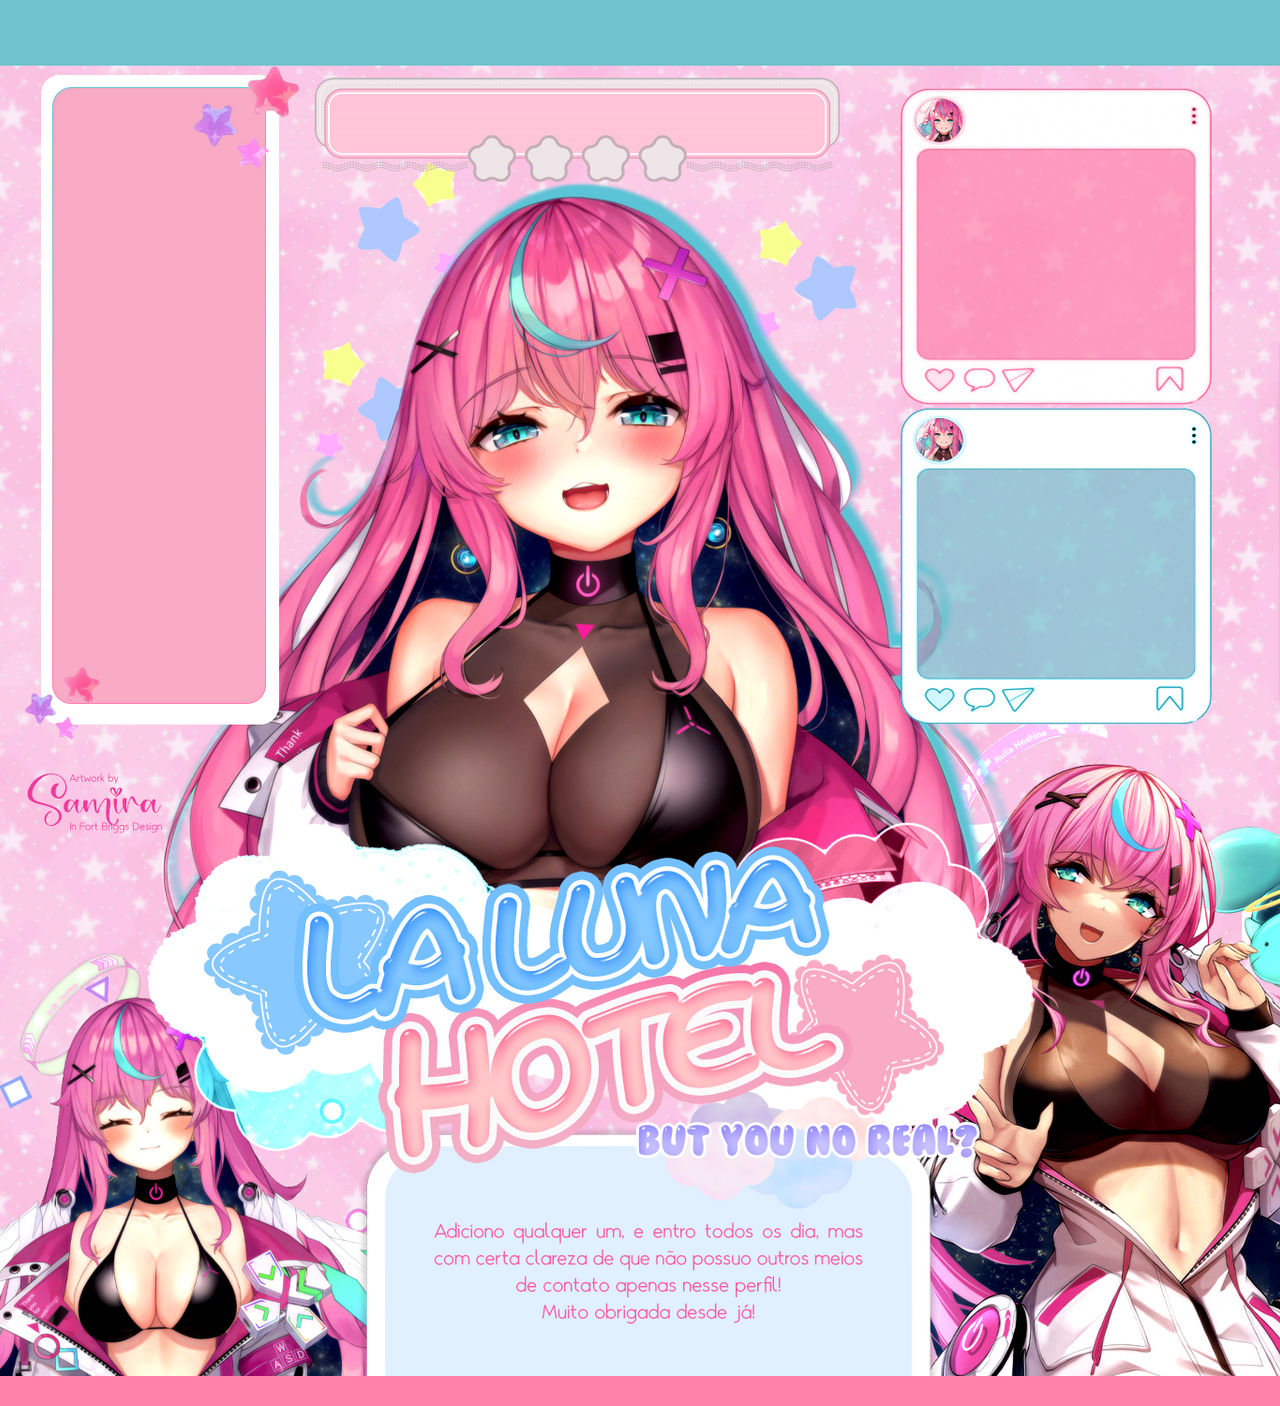 Layout for L3xis] - MODELO 01 by ImaginariumAdm on DeviantArt